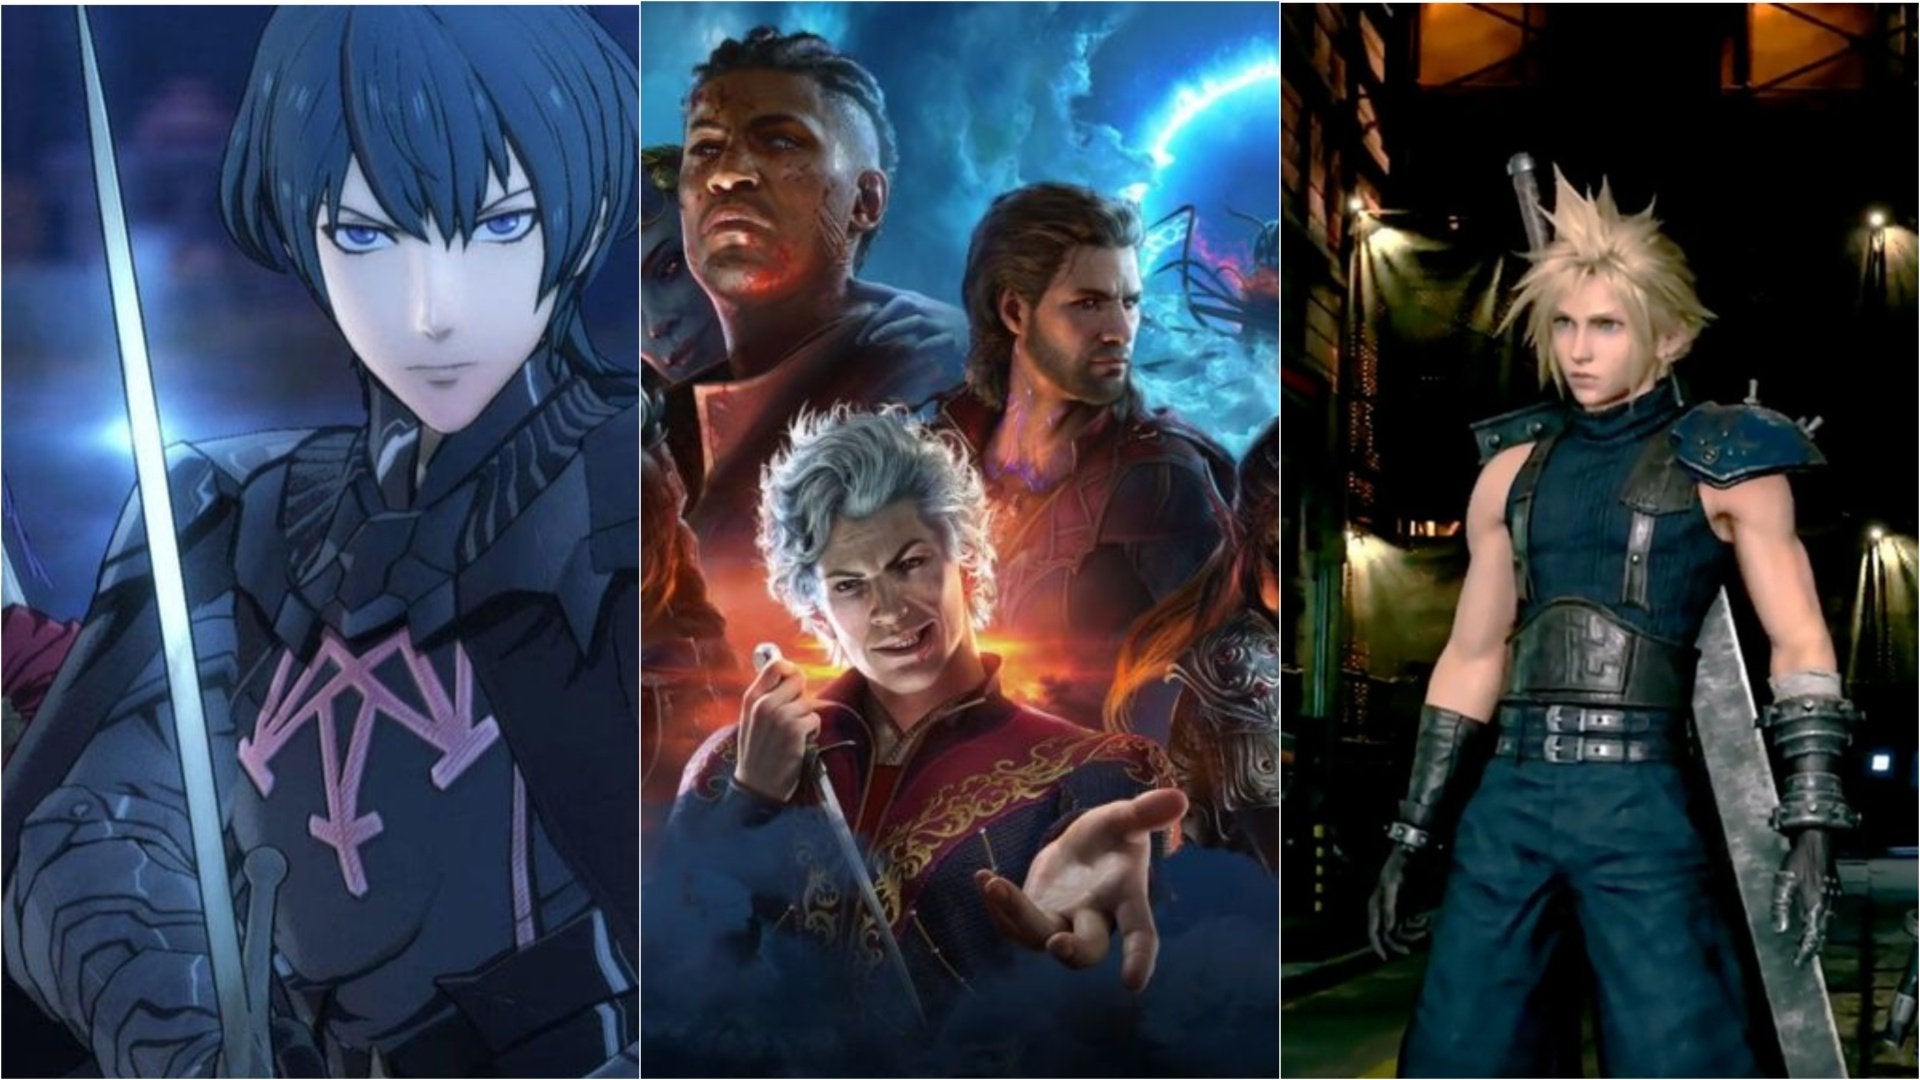 On the left is Byleth from Fire Emblem: Three Houses, in the center are Wyll, Astarion, and Gale from Baldur's Gate 3, and on the right is Cloud from Final Fantasy VII Remake.